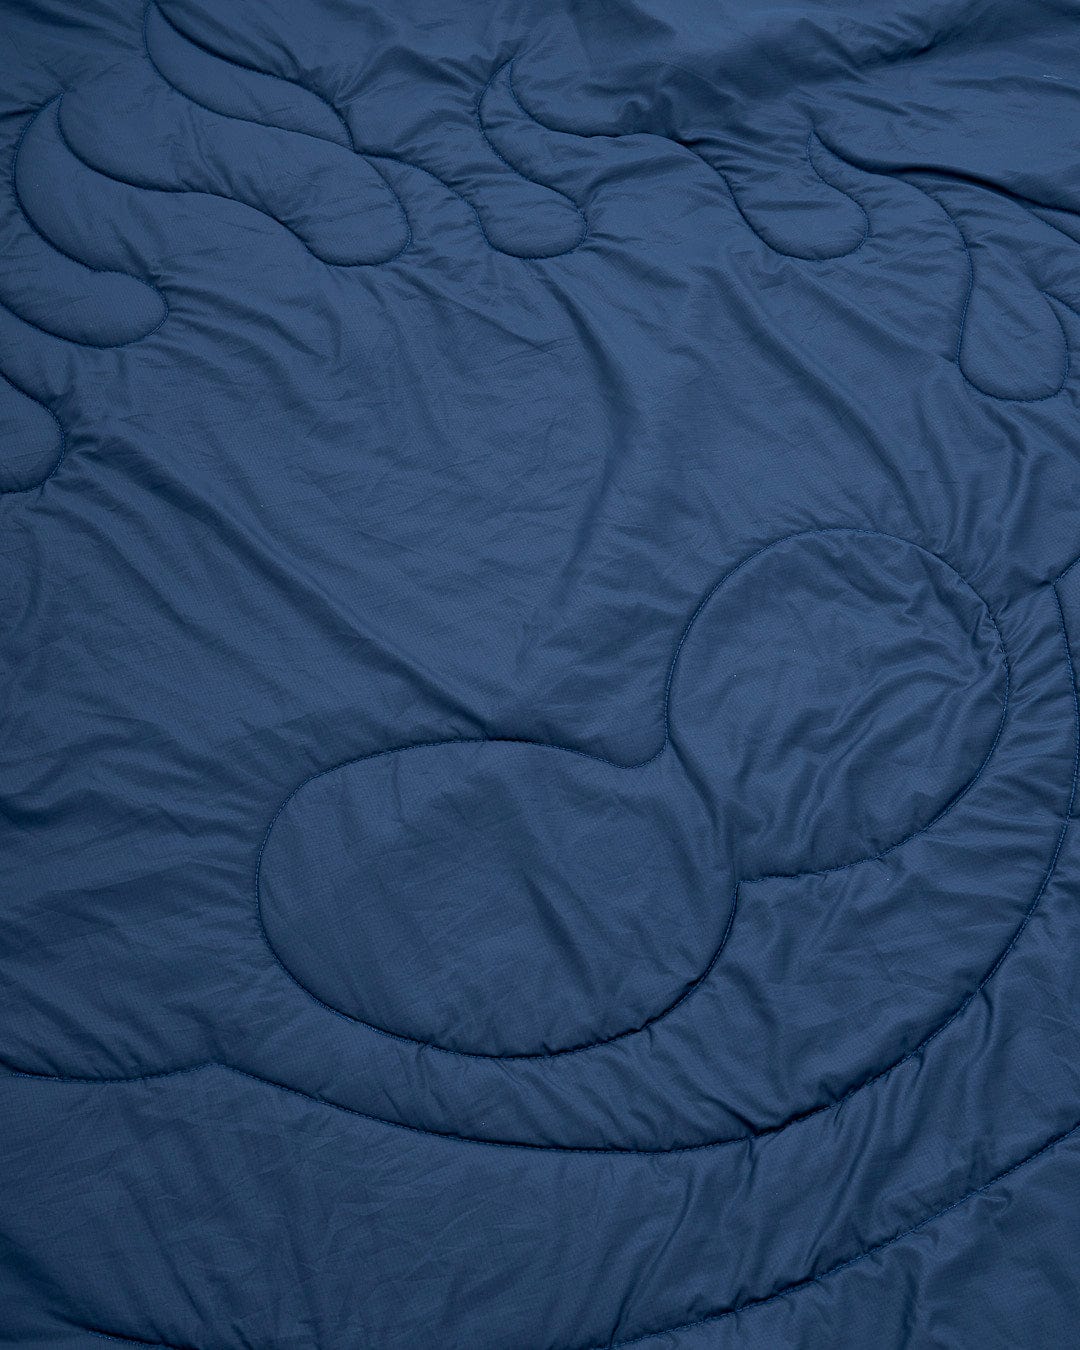 A Yogi - Camping Blanket - Blue quilt on a bed. (Brand: Saltrock)